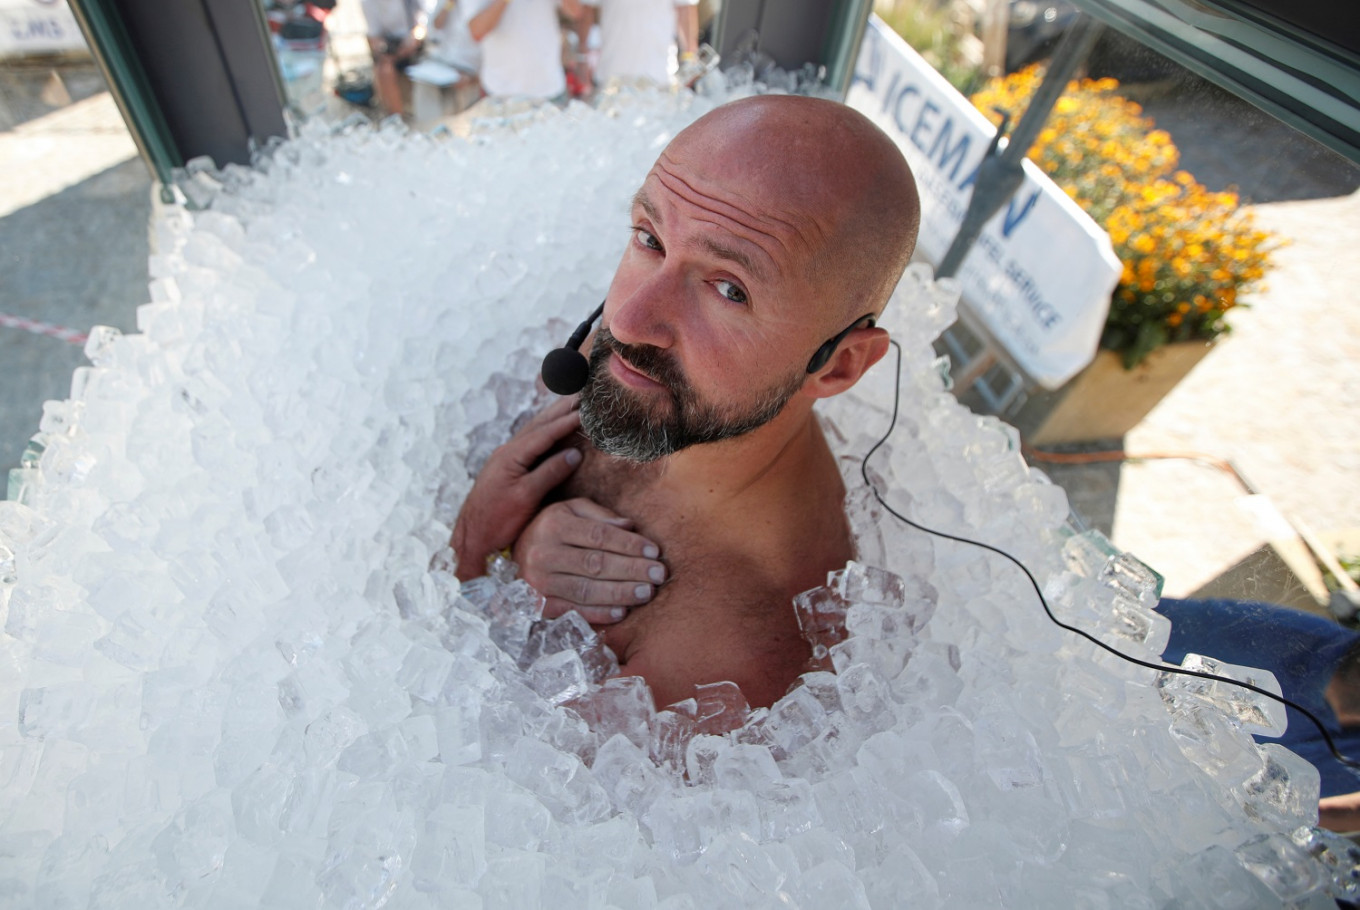 Chilling out: Austrian breaks record for standing in box of ice - People -  The Jakarta Post